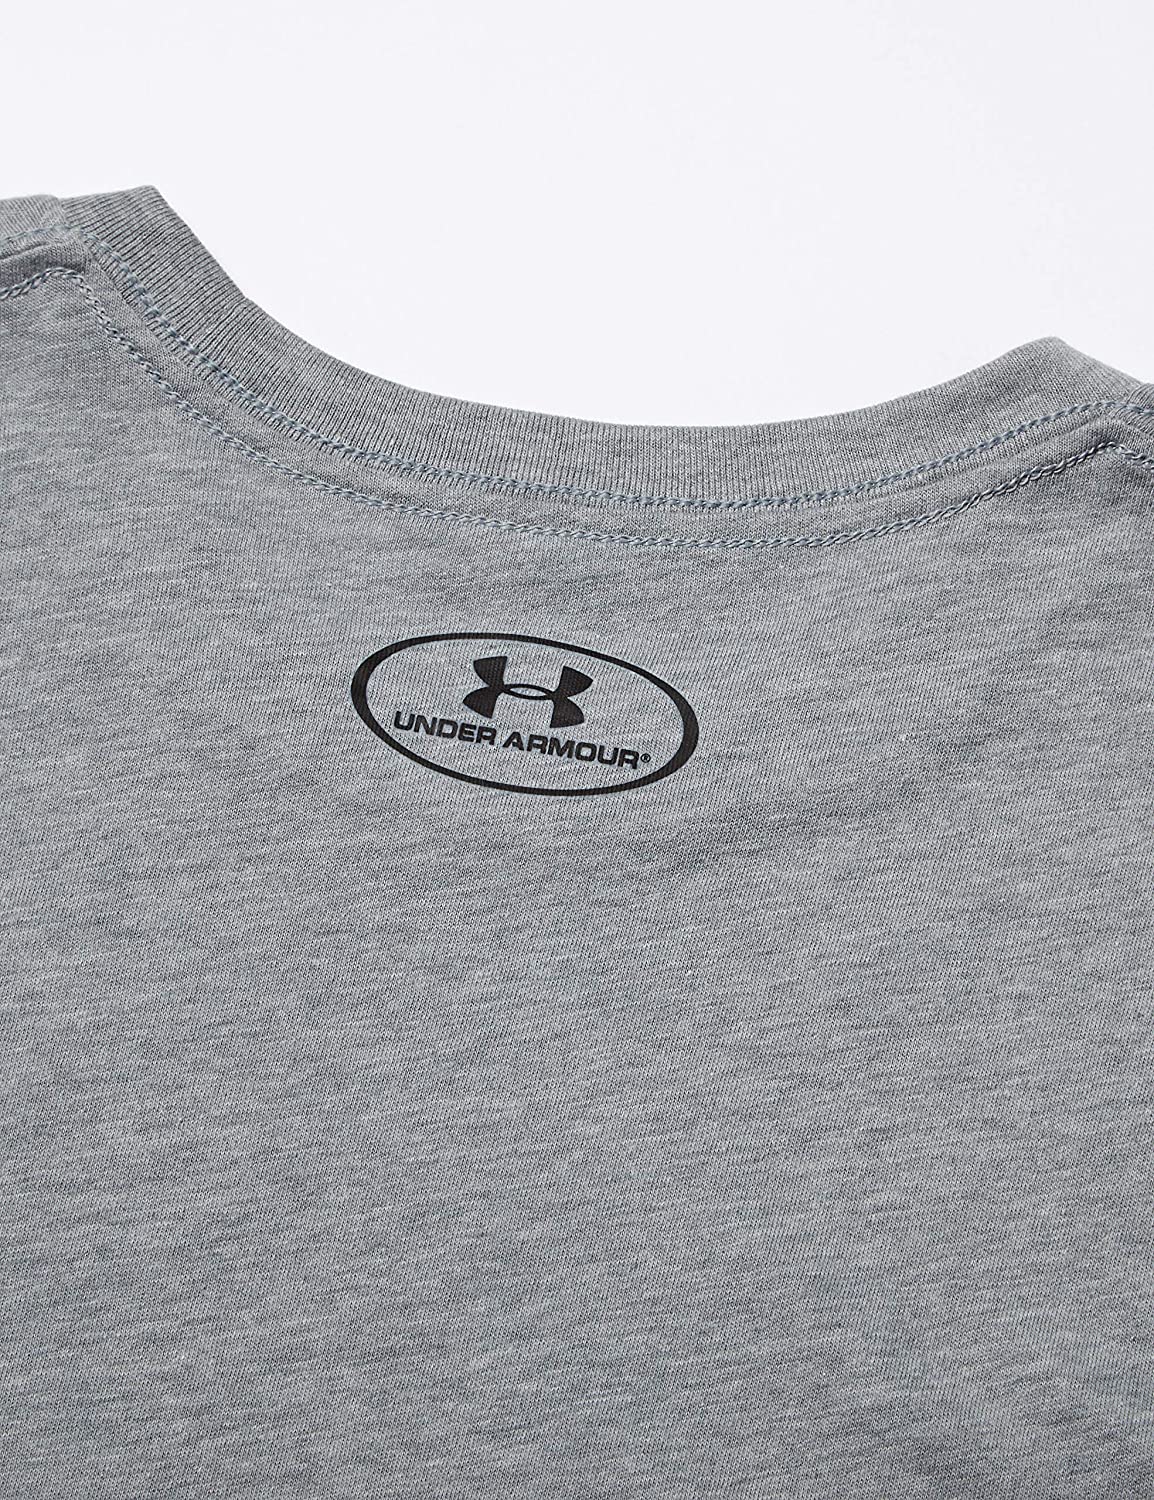 Under Armour Men's and Big Men's UA Sportstyle Left Chest Logo T-shirt, Sizes up to 2XL - image 3 of 5